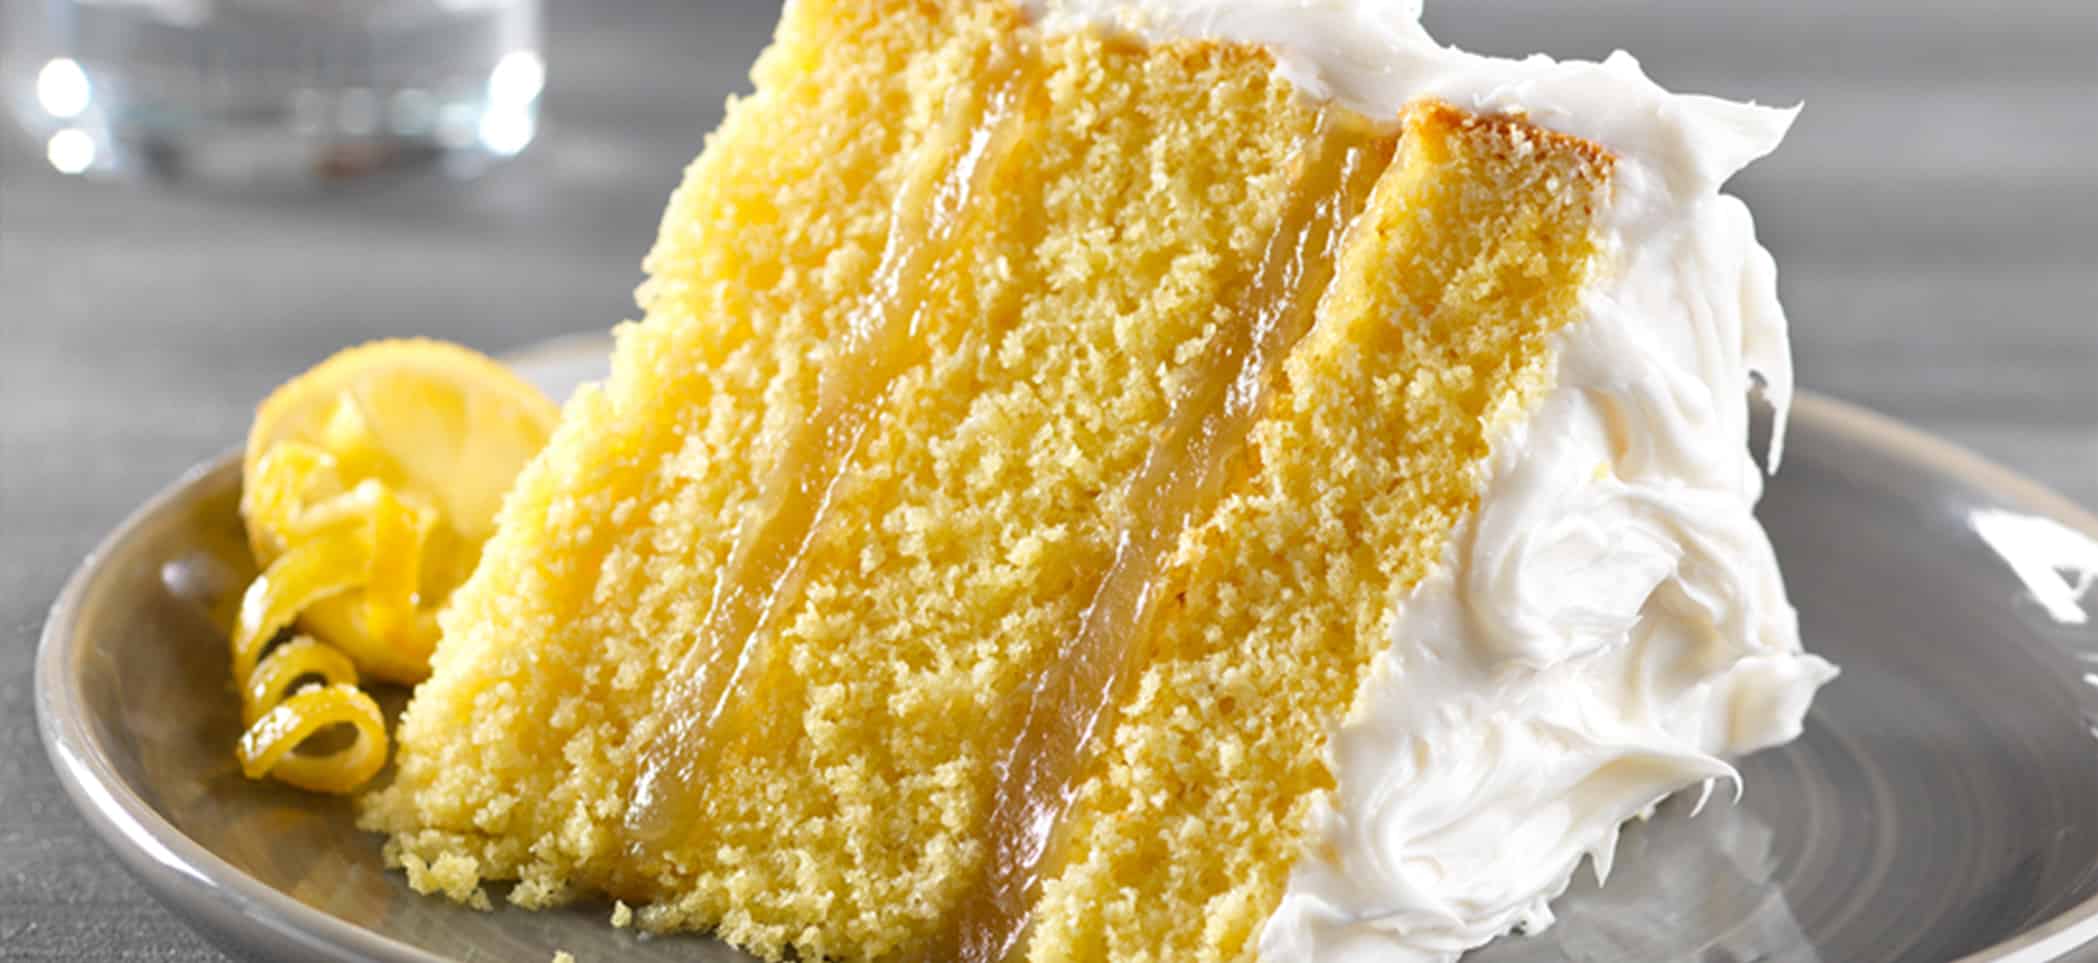 a slice of yellow cake with white frosting